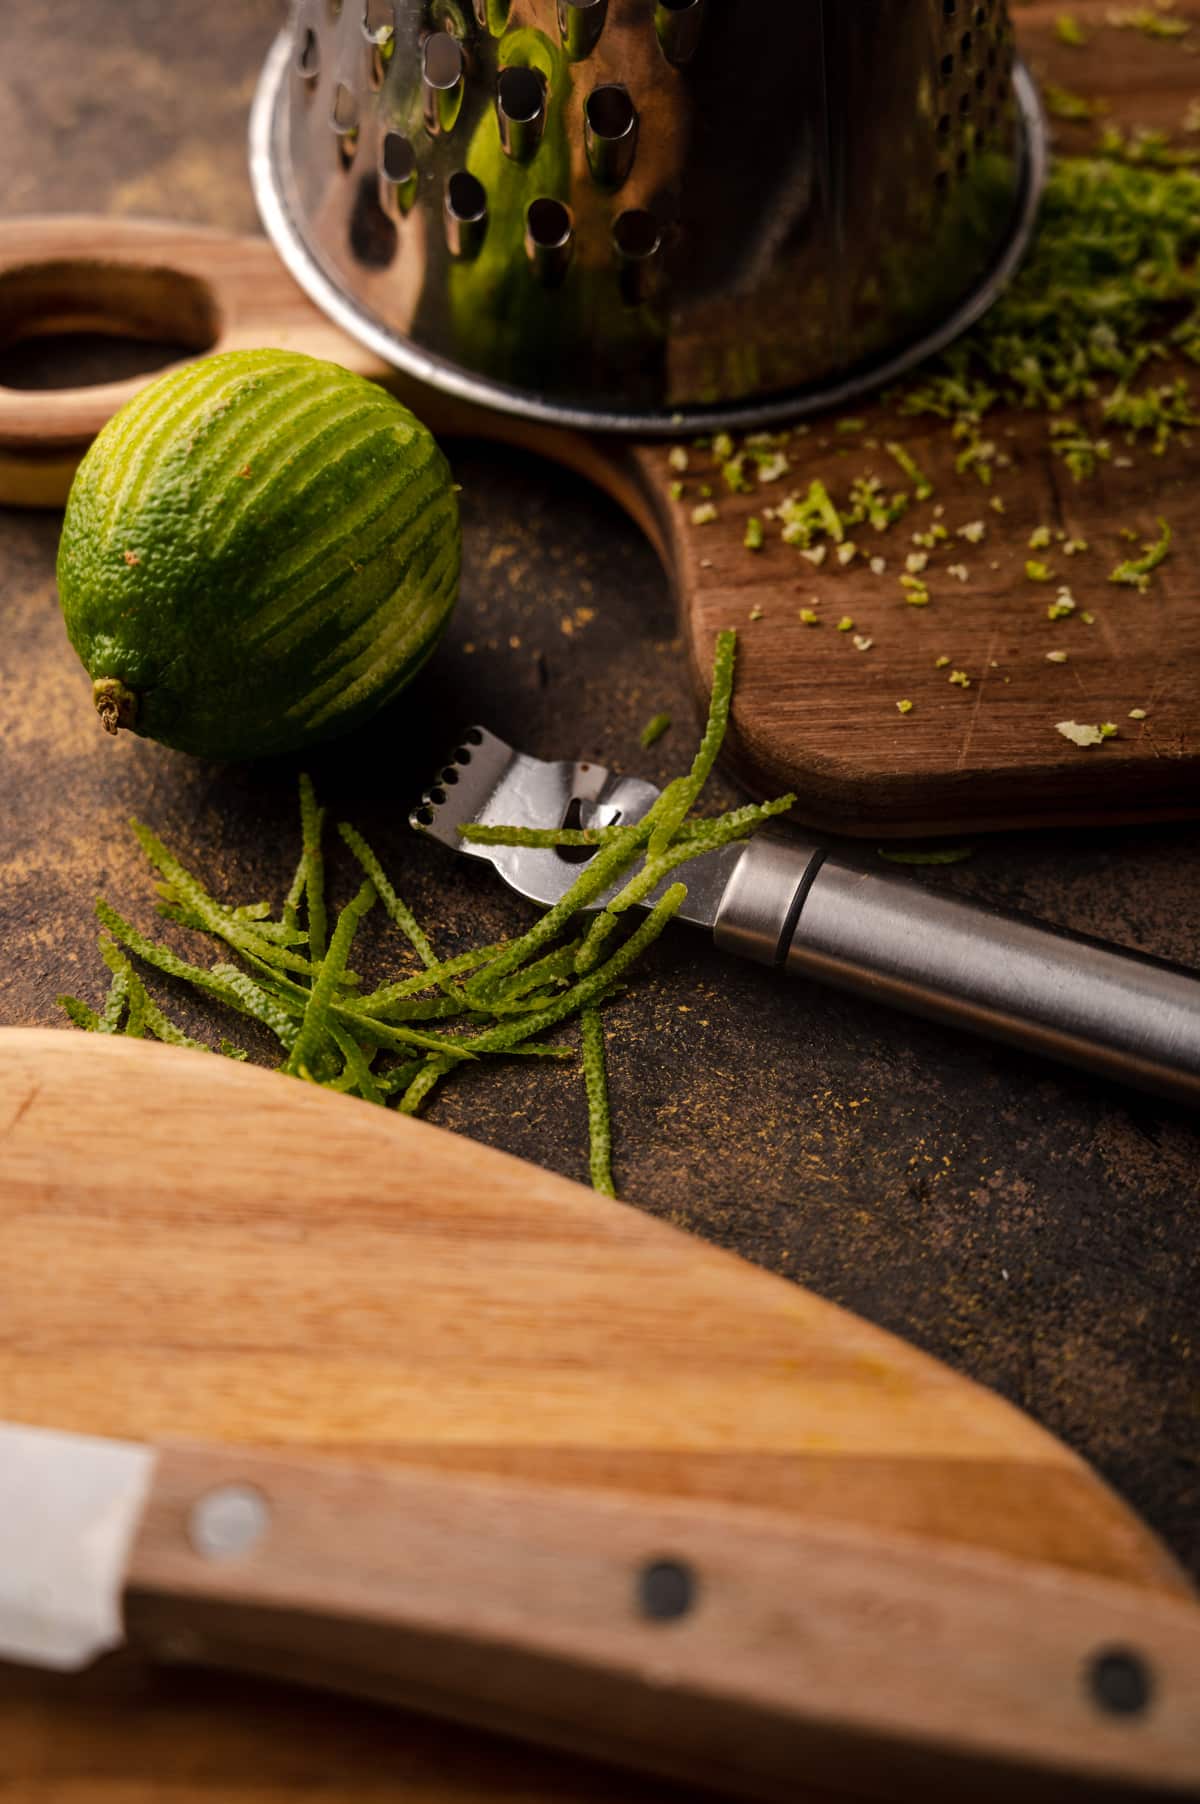 A whole lime next to a ribbon zester and wooden cutting boards.